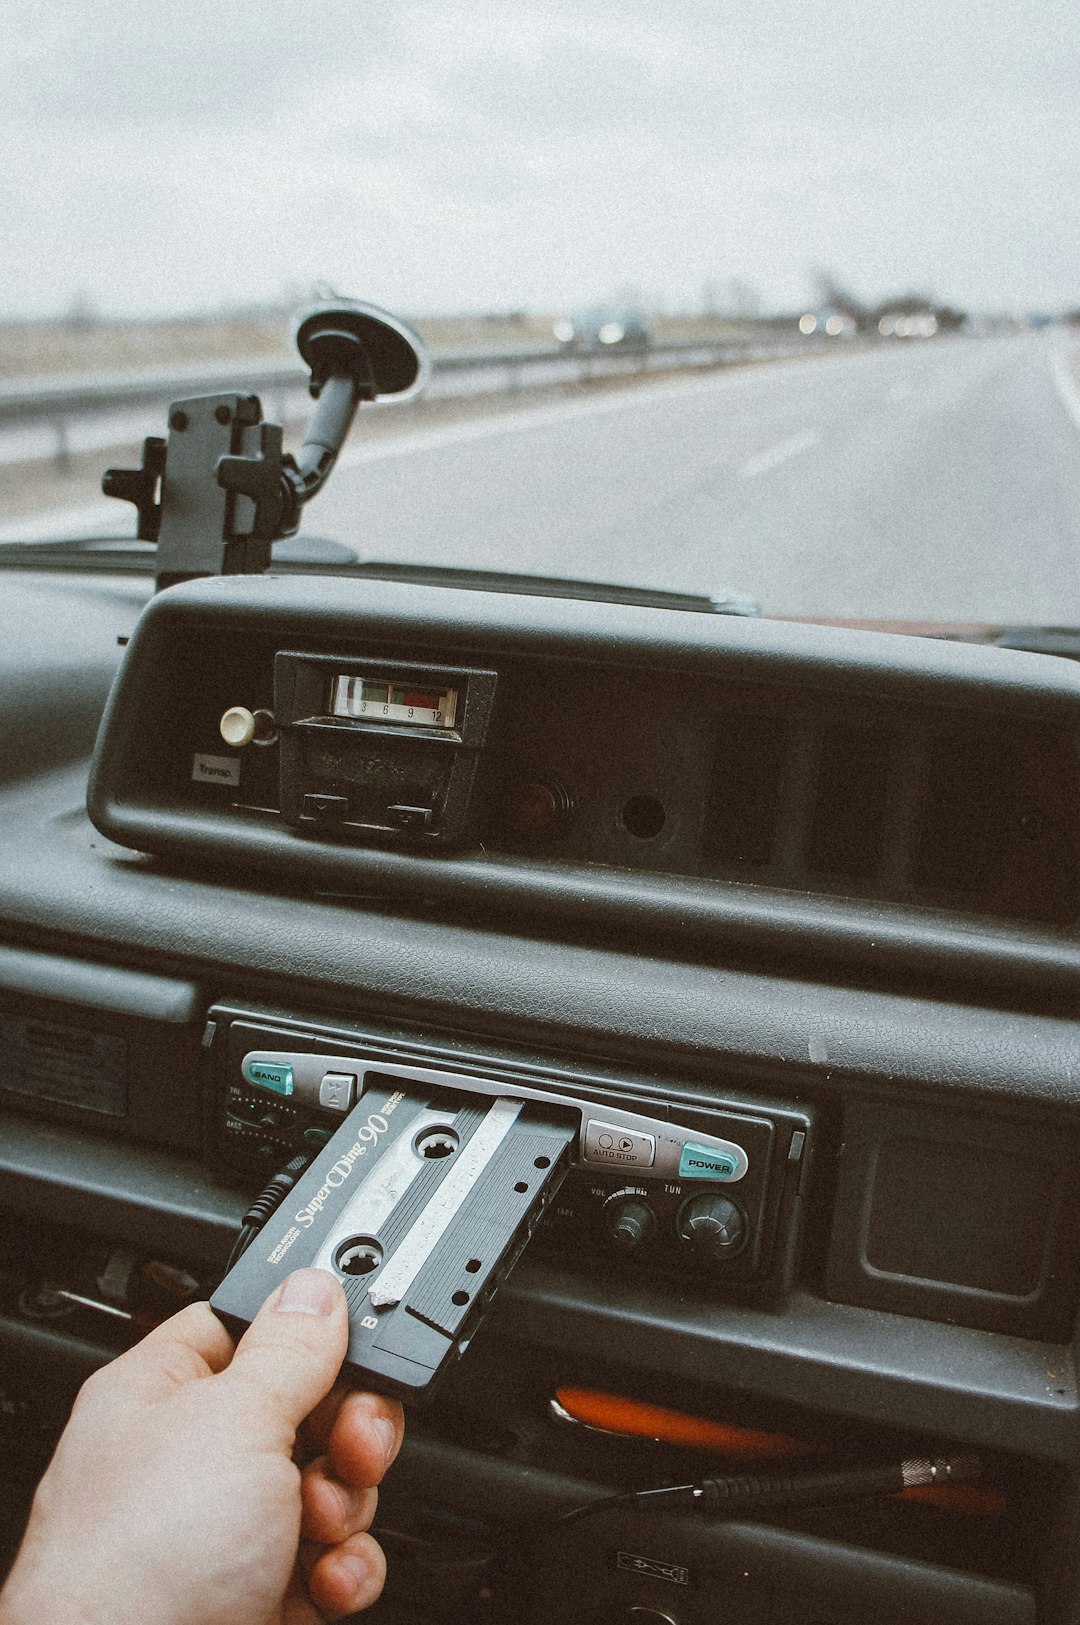 Car's dashboard with cassette player and cassette being inserted.